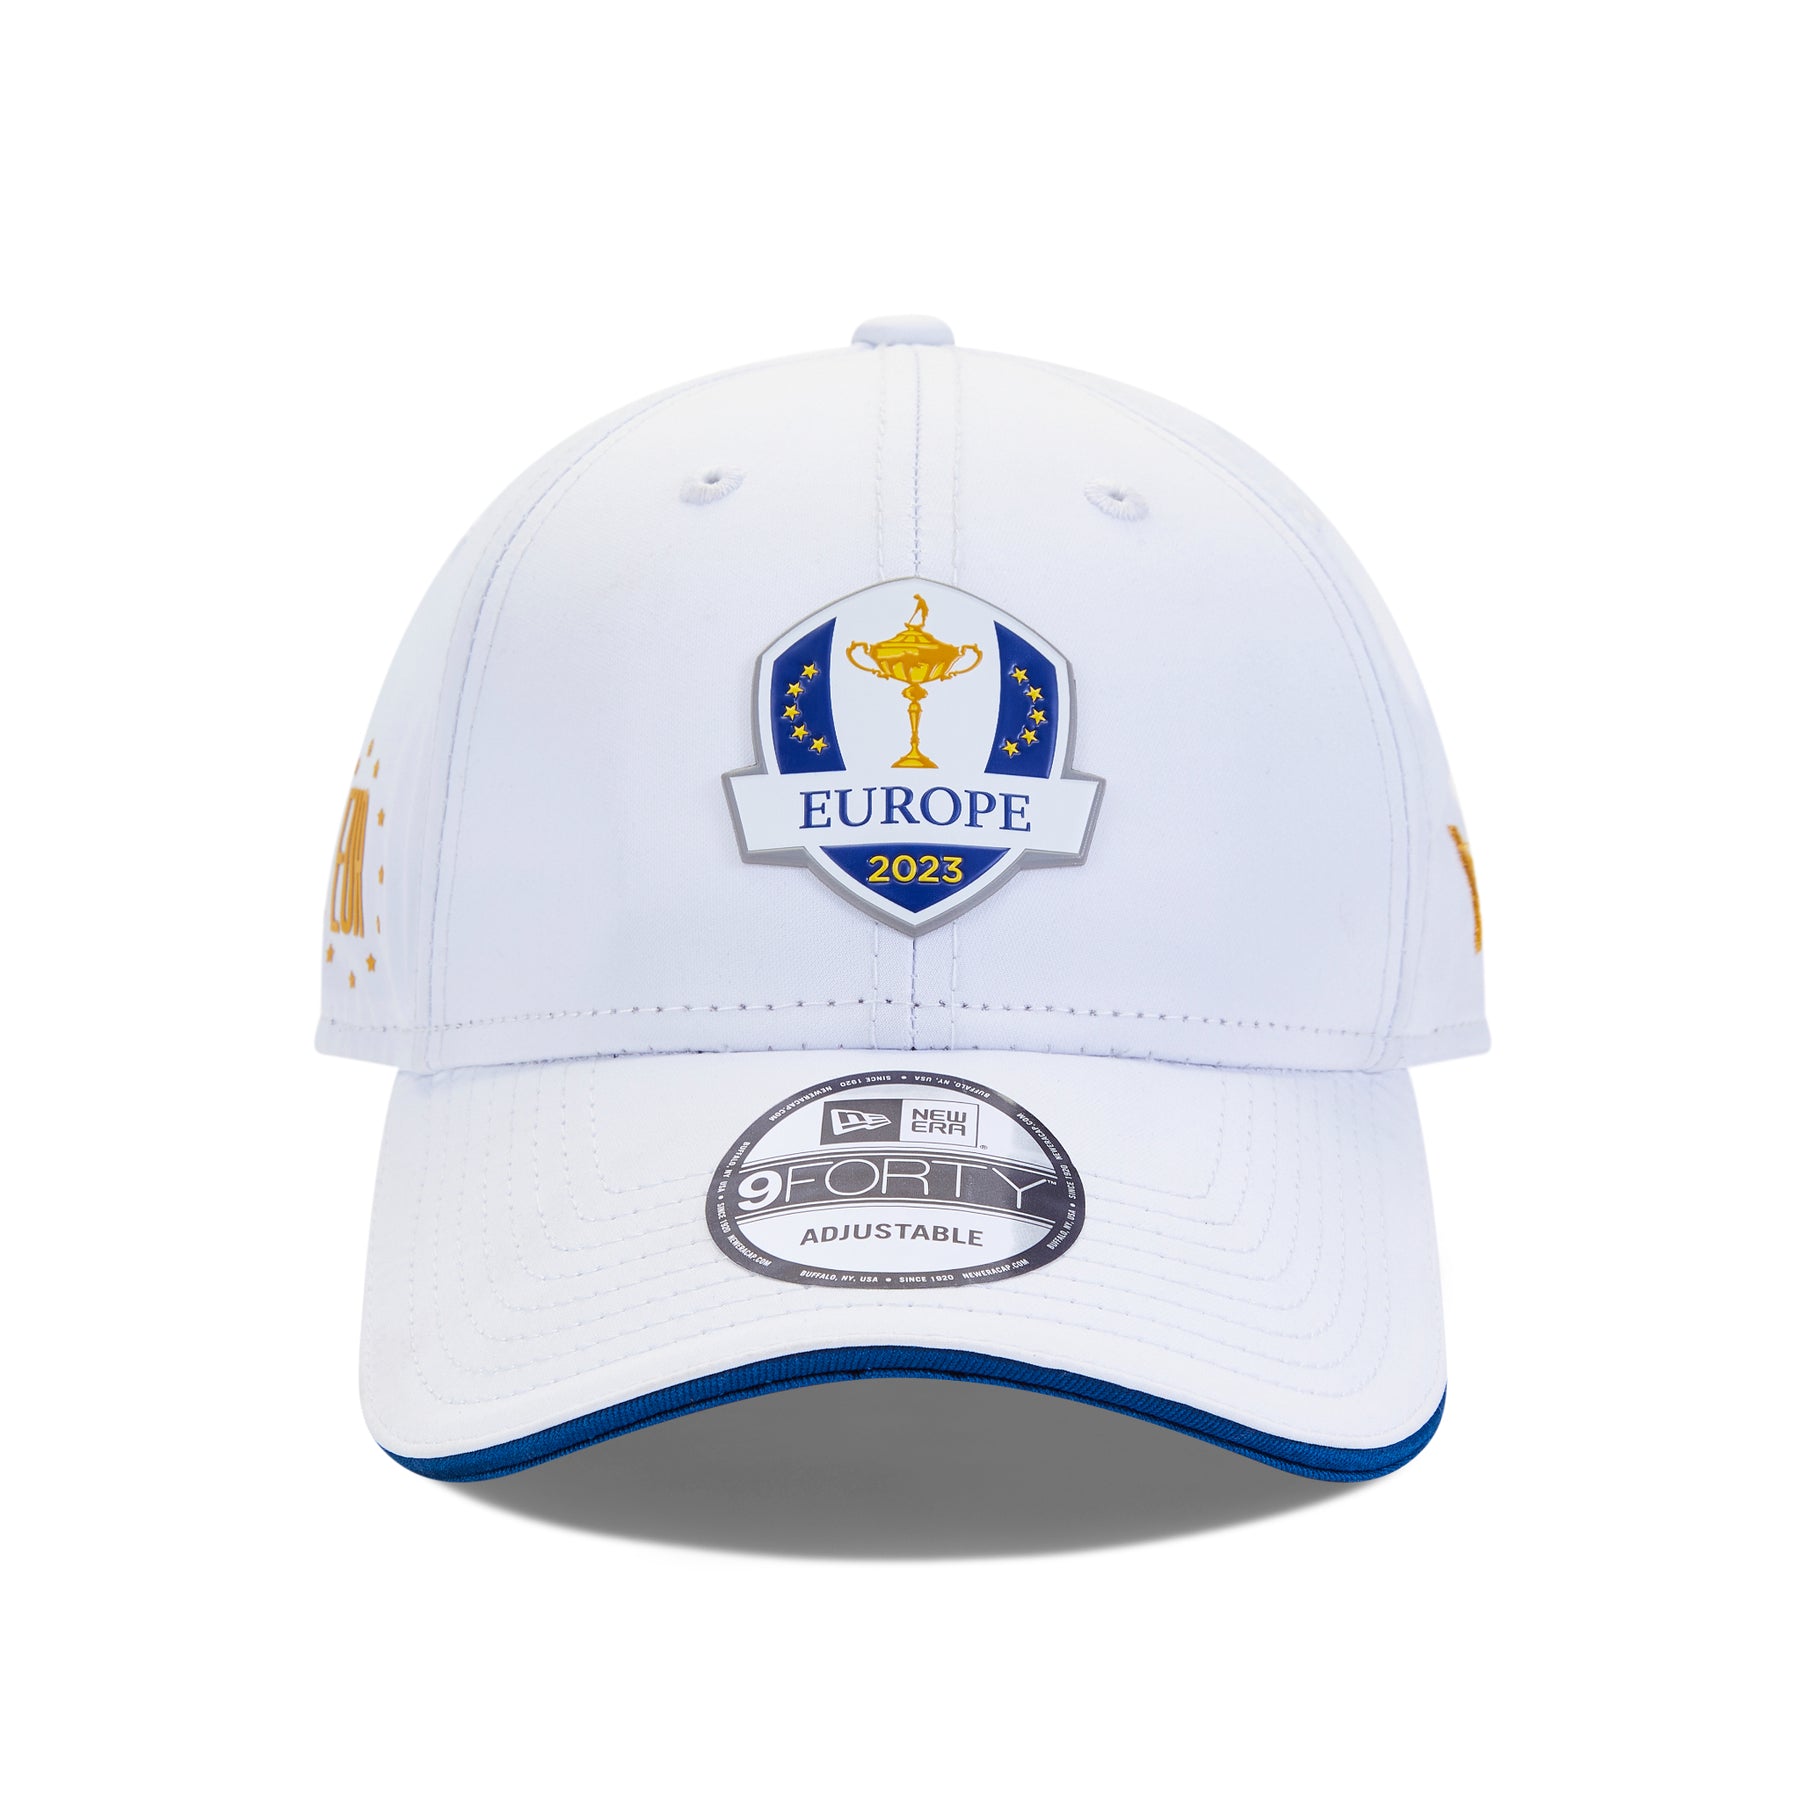 Ryder Cup Hats & Beanies For Sale The Official European Ryder Cup Shop